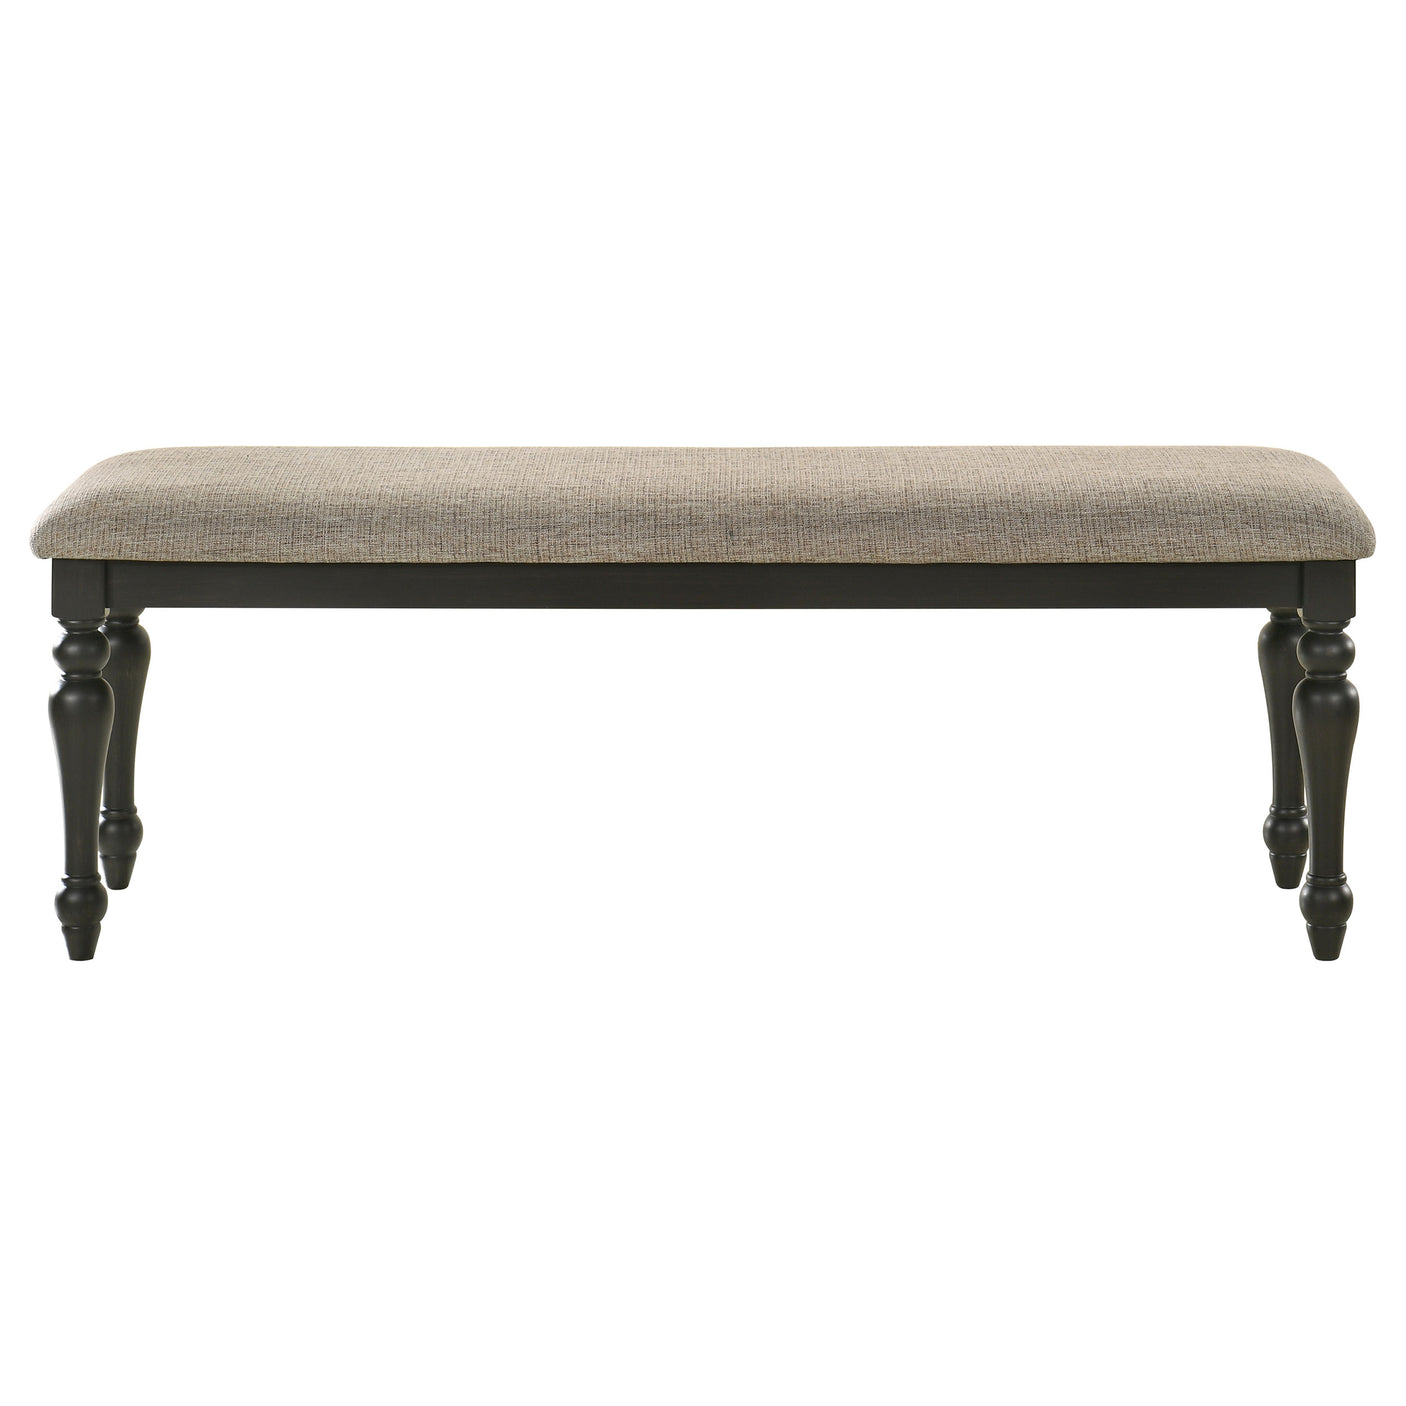 Bench - Bridget Upholstered Dining Bench Stone Brown and Charcoal Sandthrough